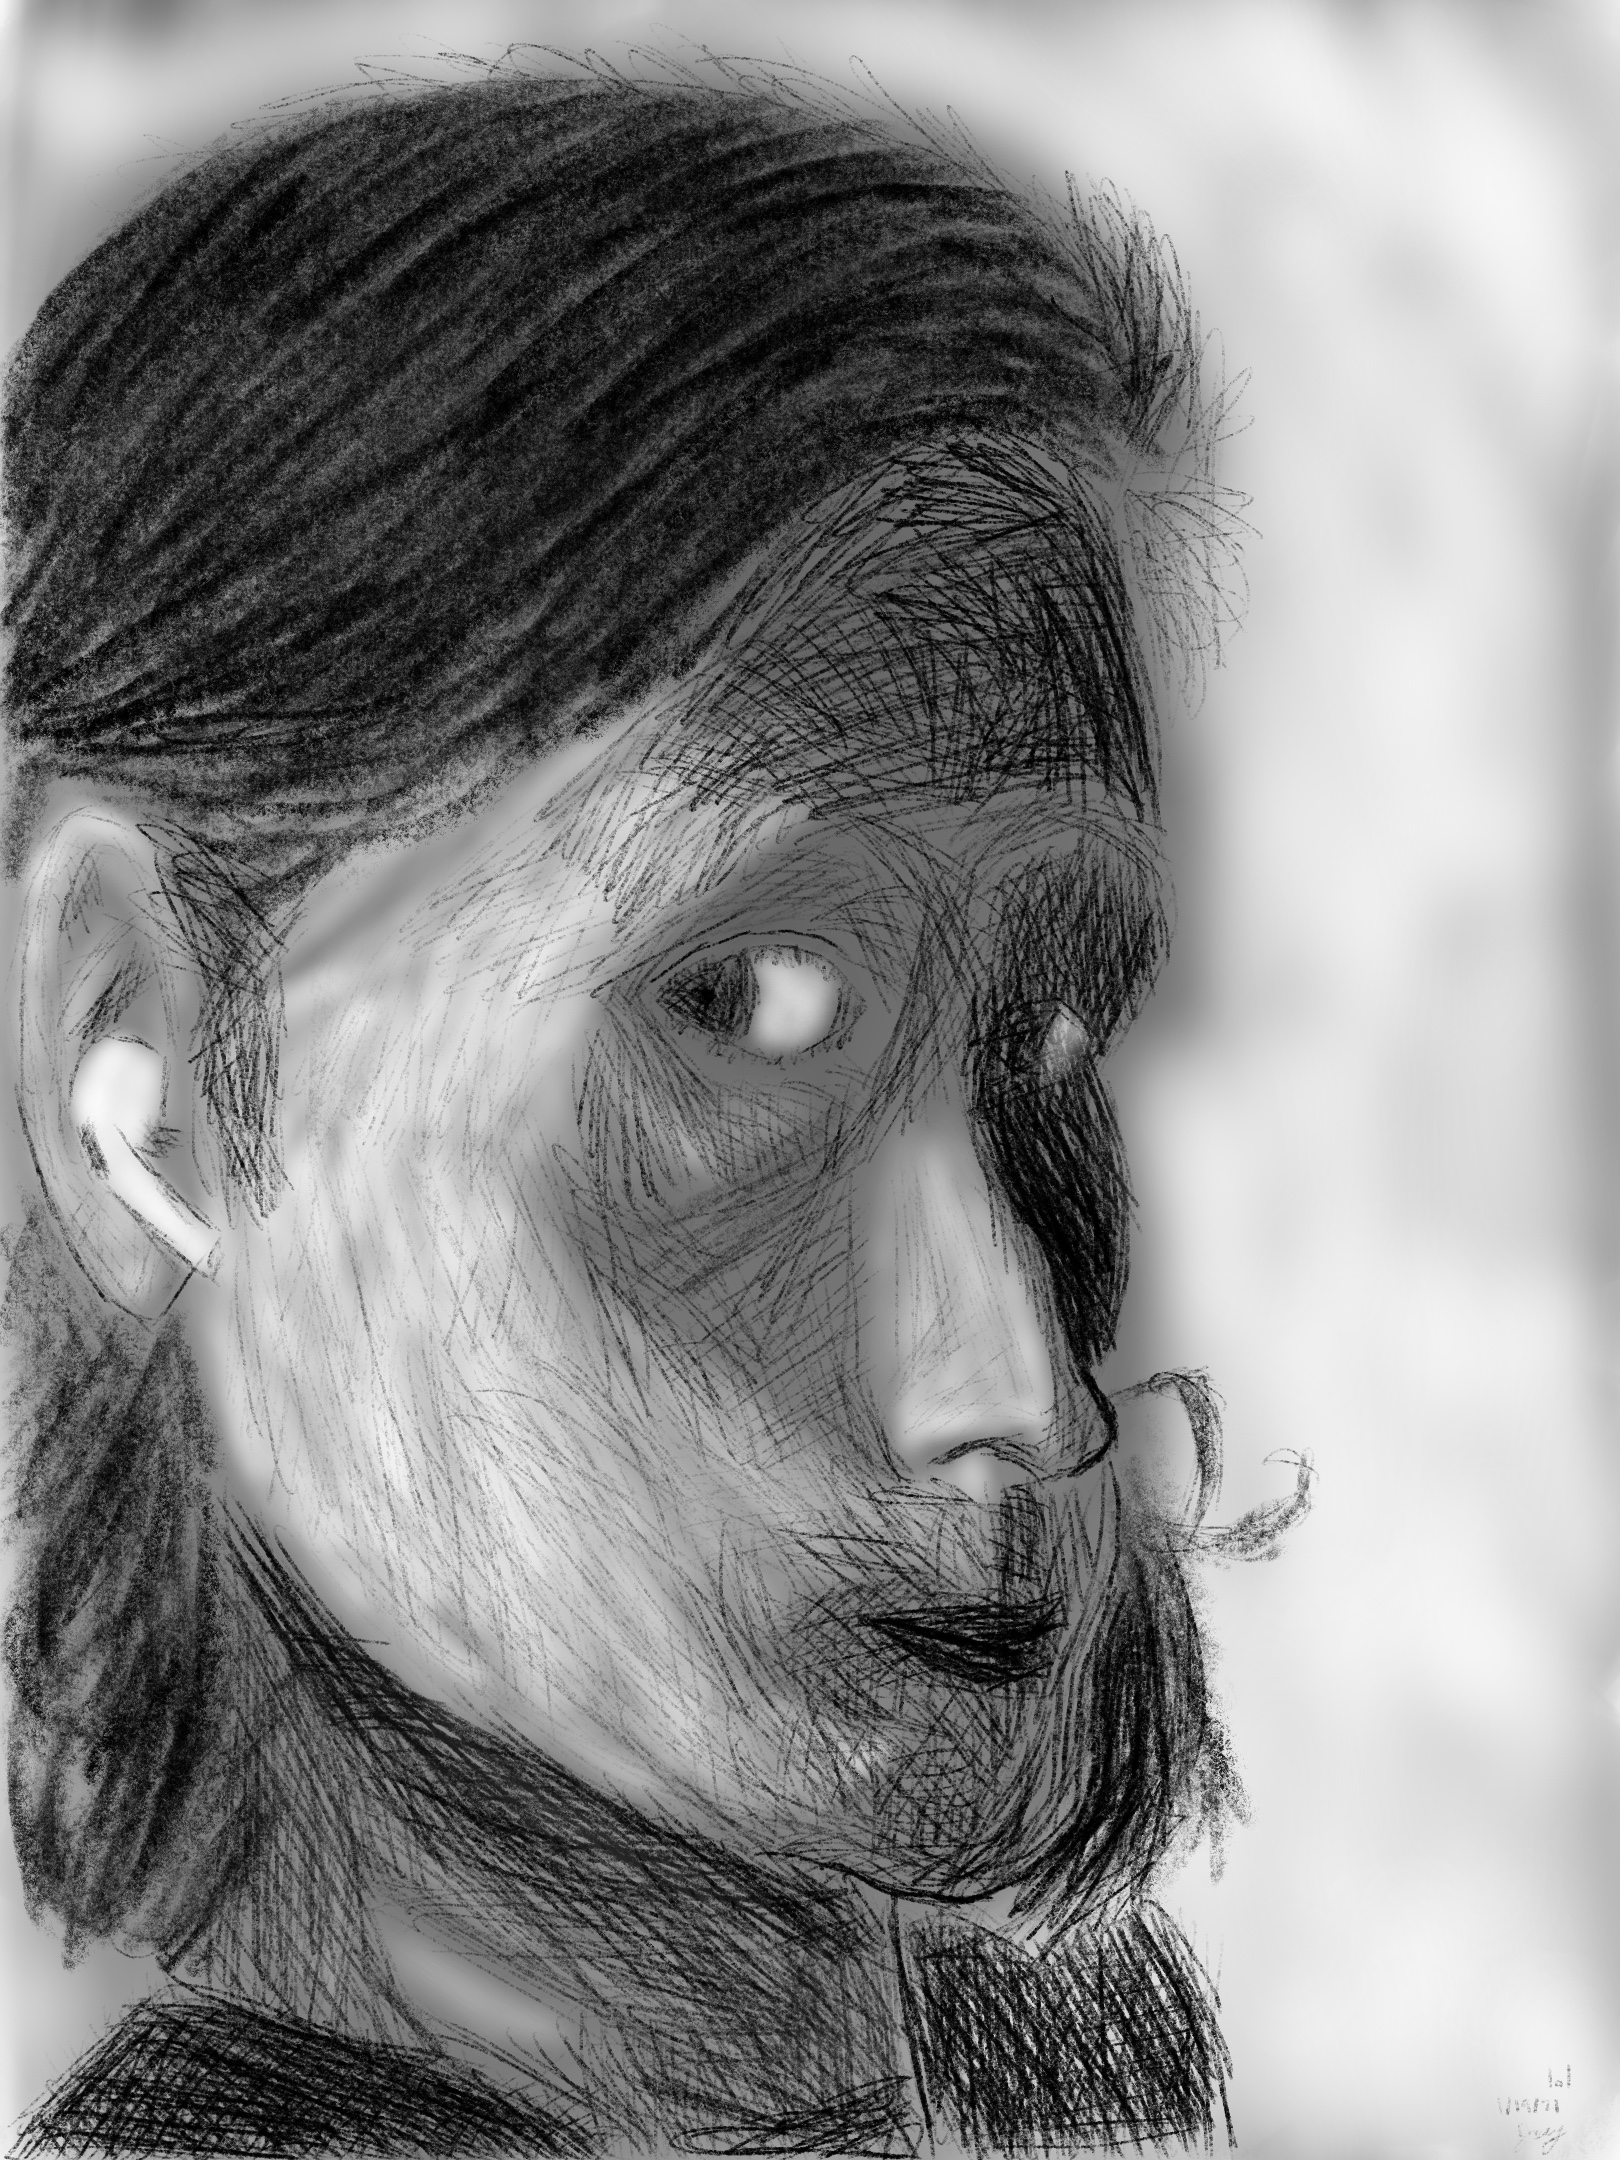 A face, with one side in dark shadow. The proportions are odd.